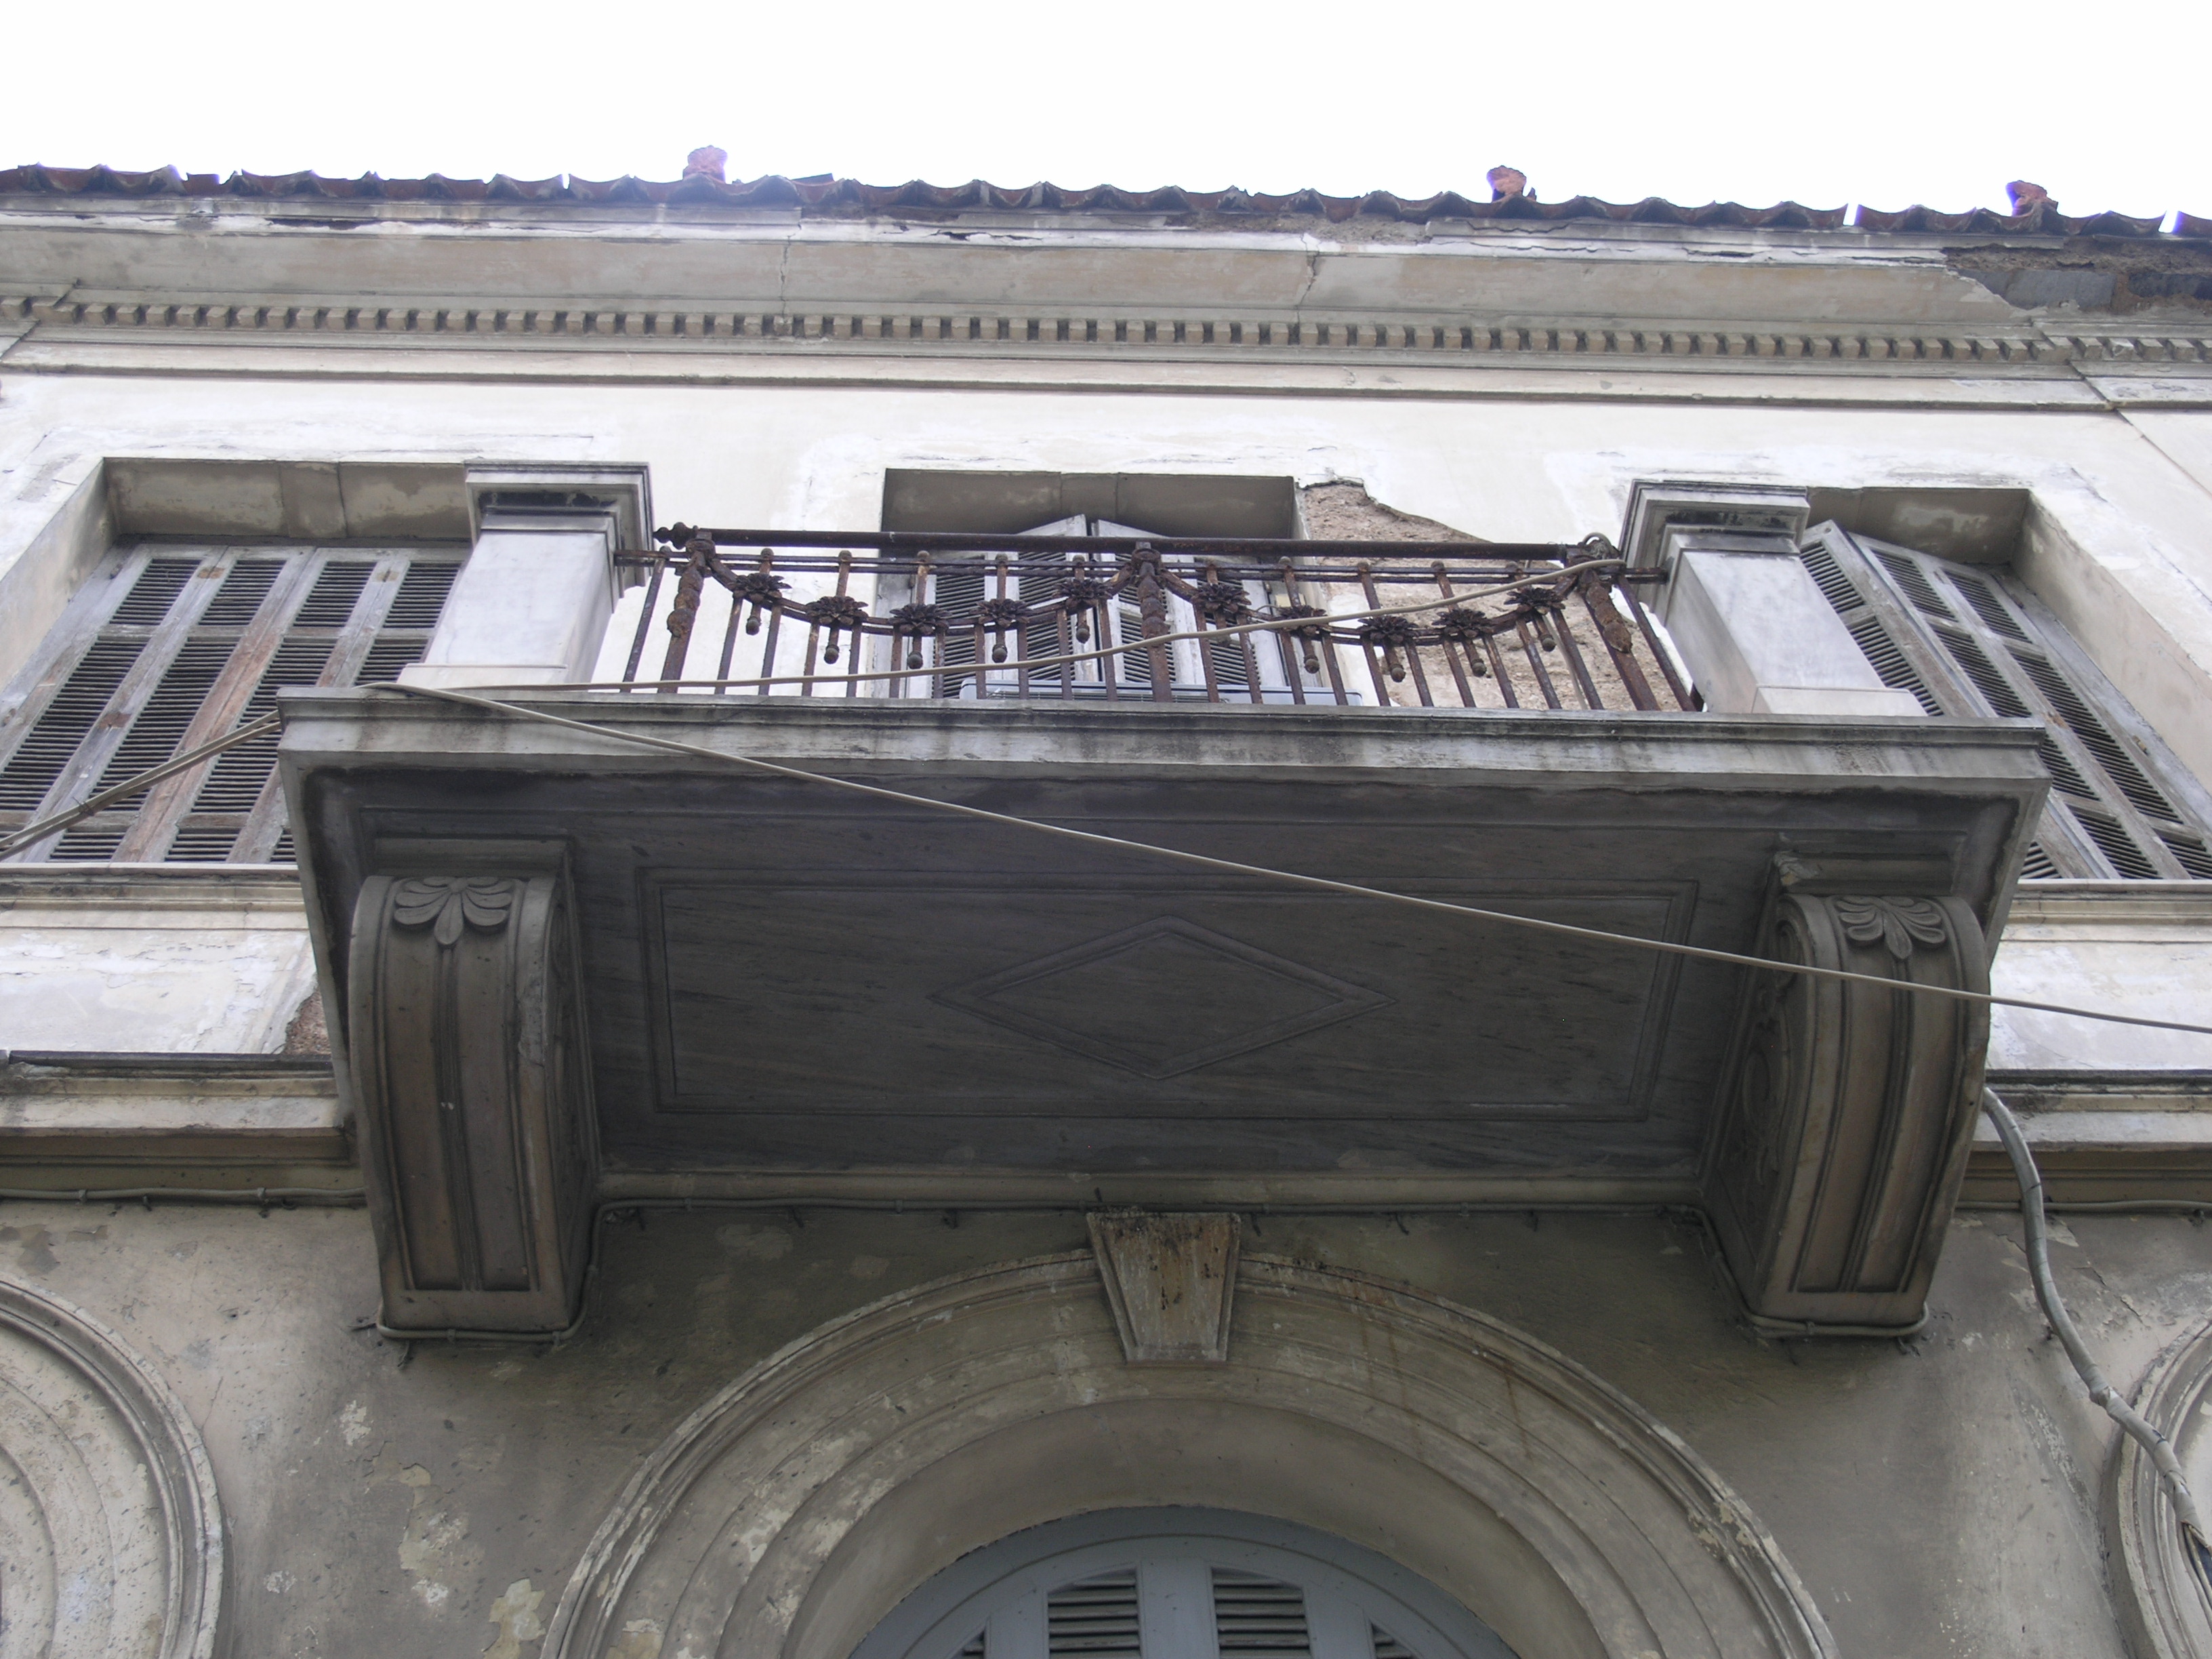 General view of balcony